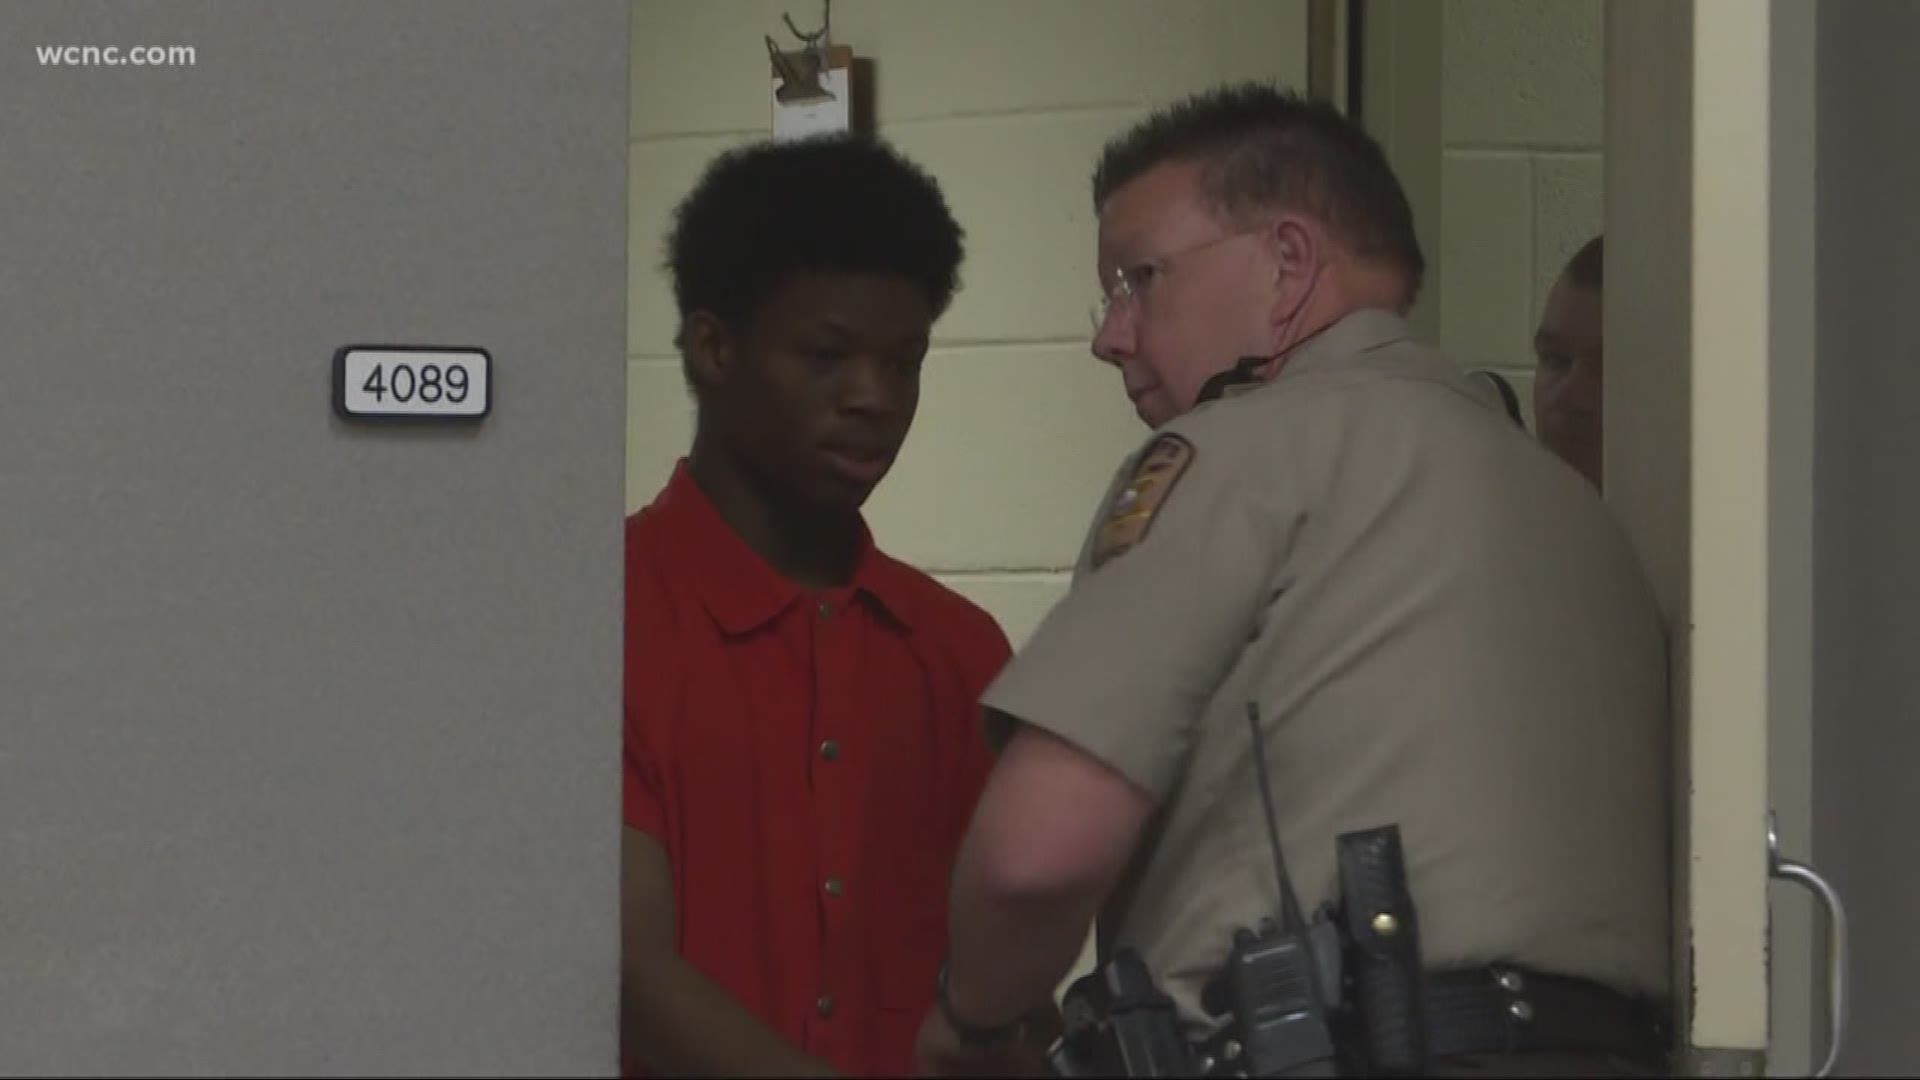 A Gaston County teenager pleads guilty to threatening to shoot up two local high schools earlier this year.